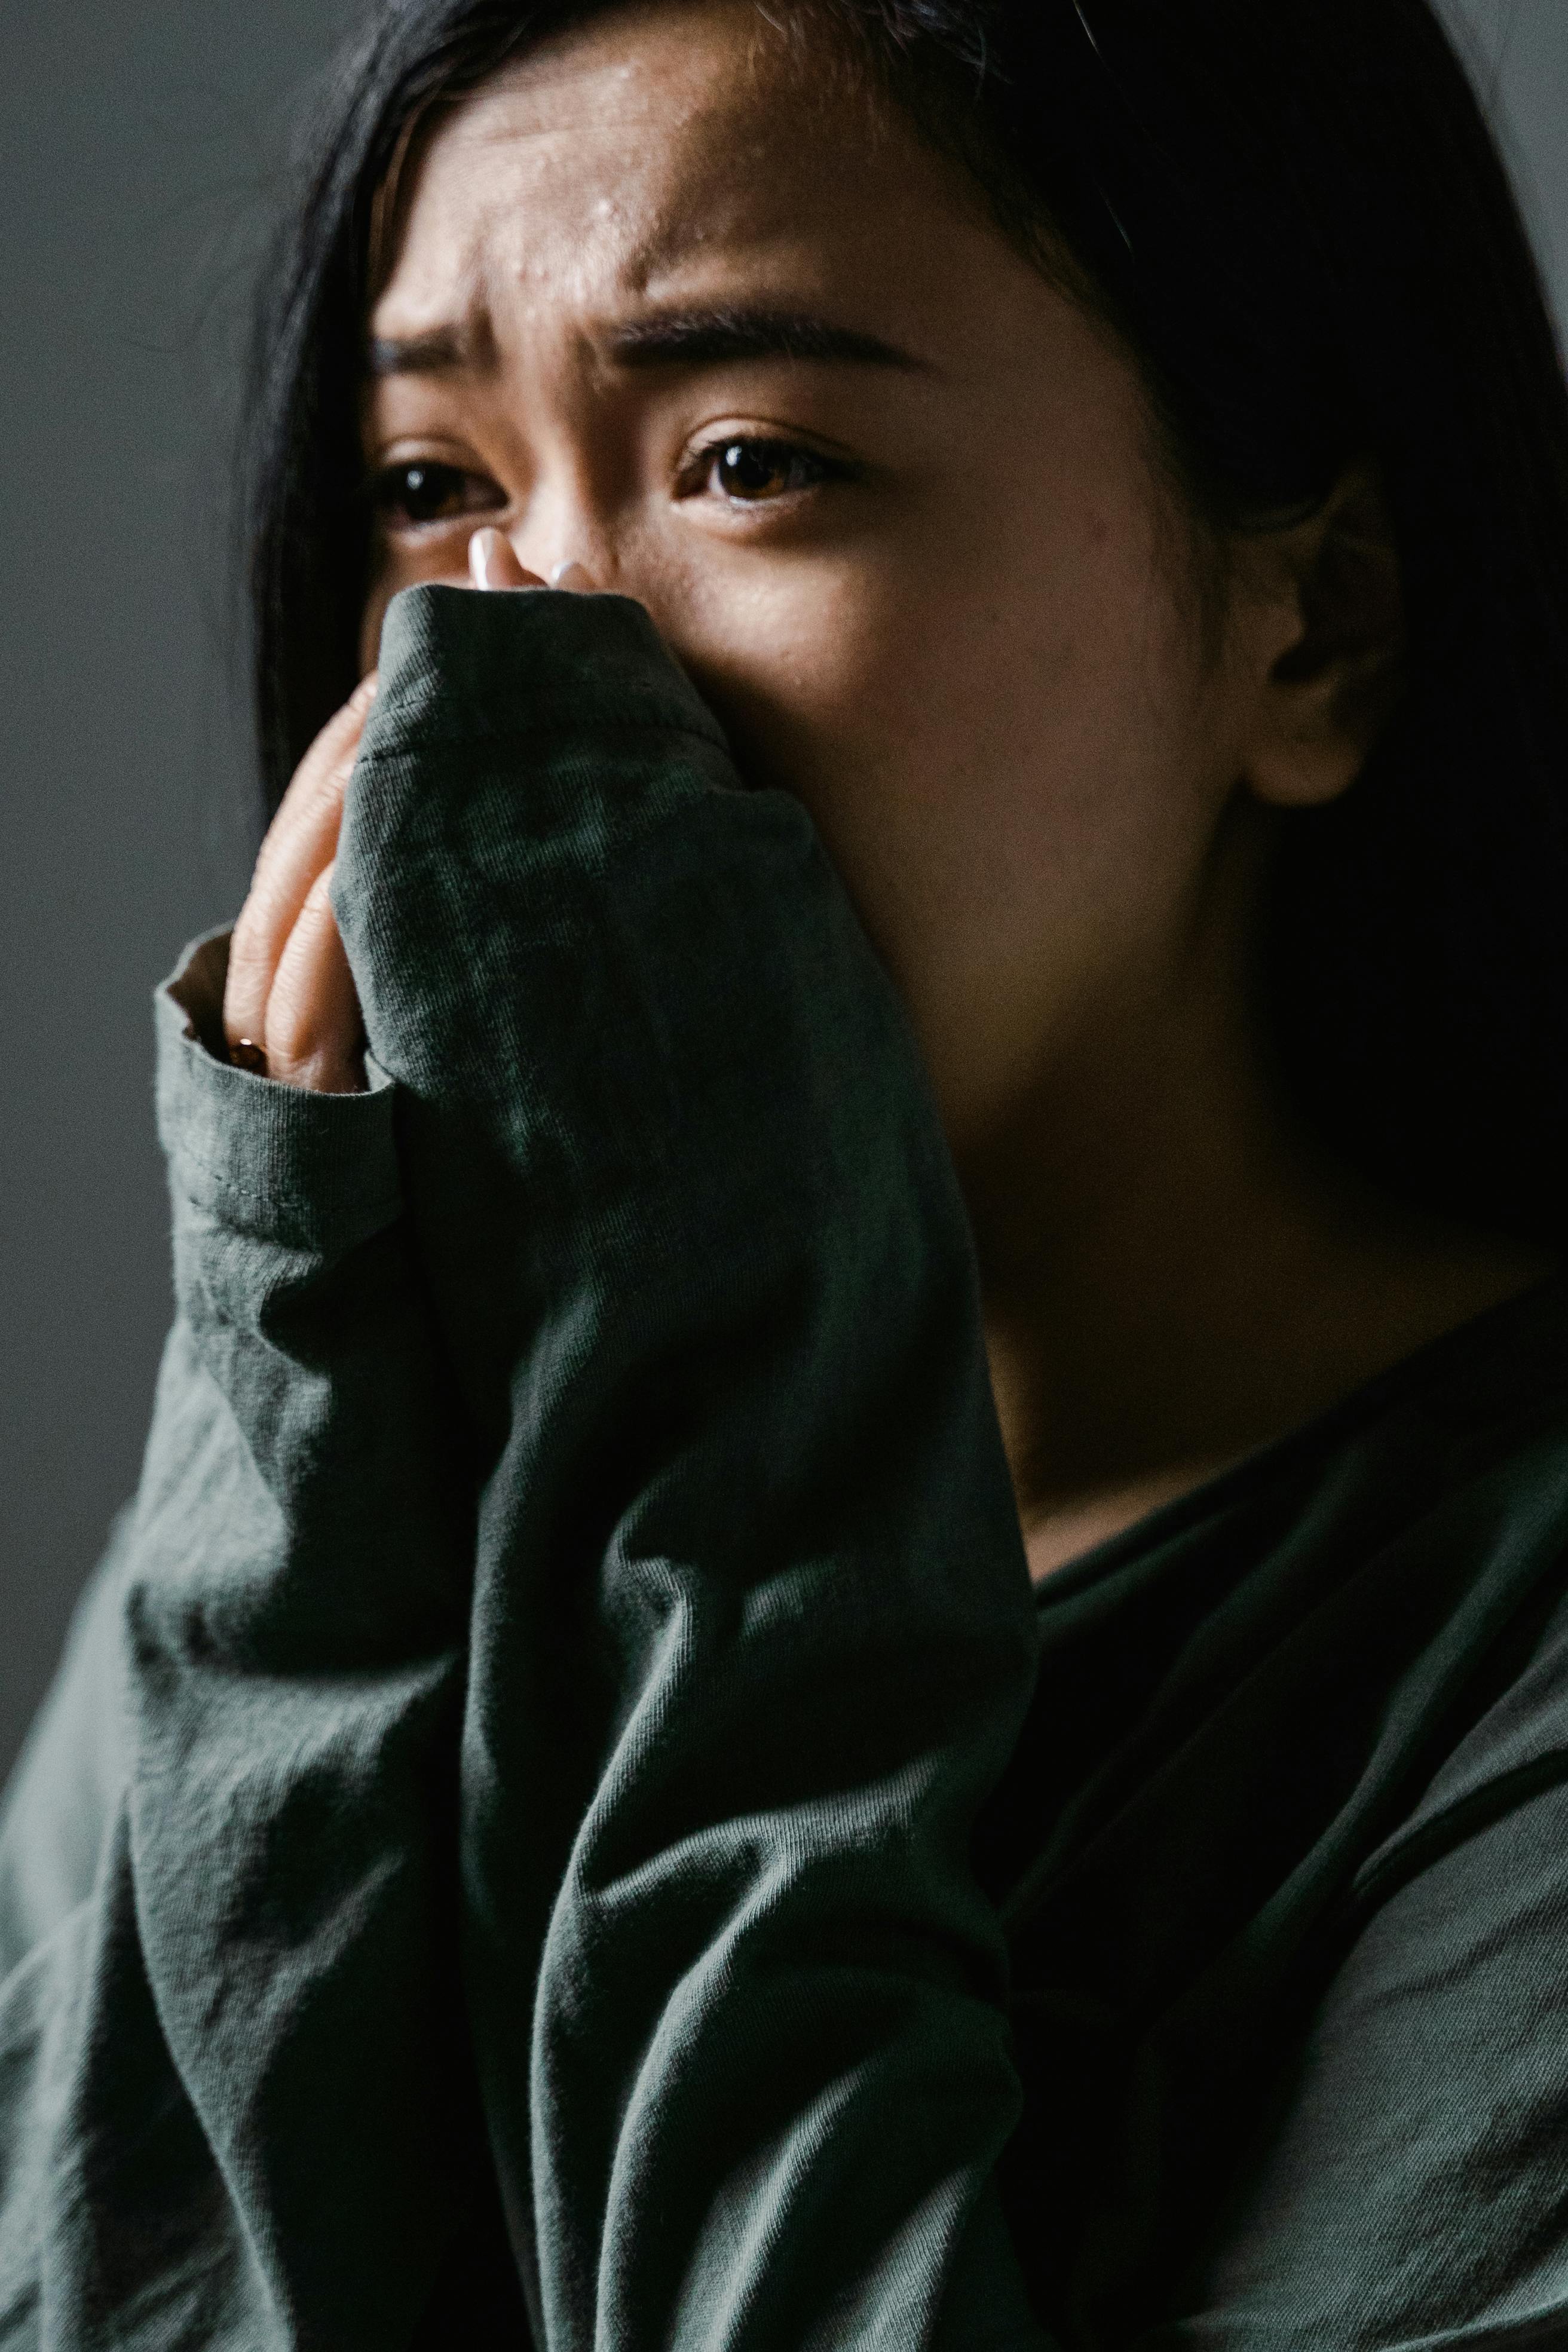 A distressed woman covering her nose and mouth | Source: Pexels